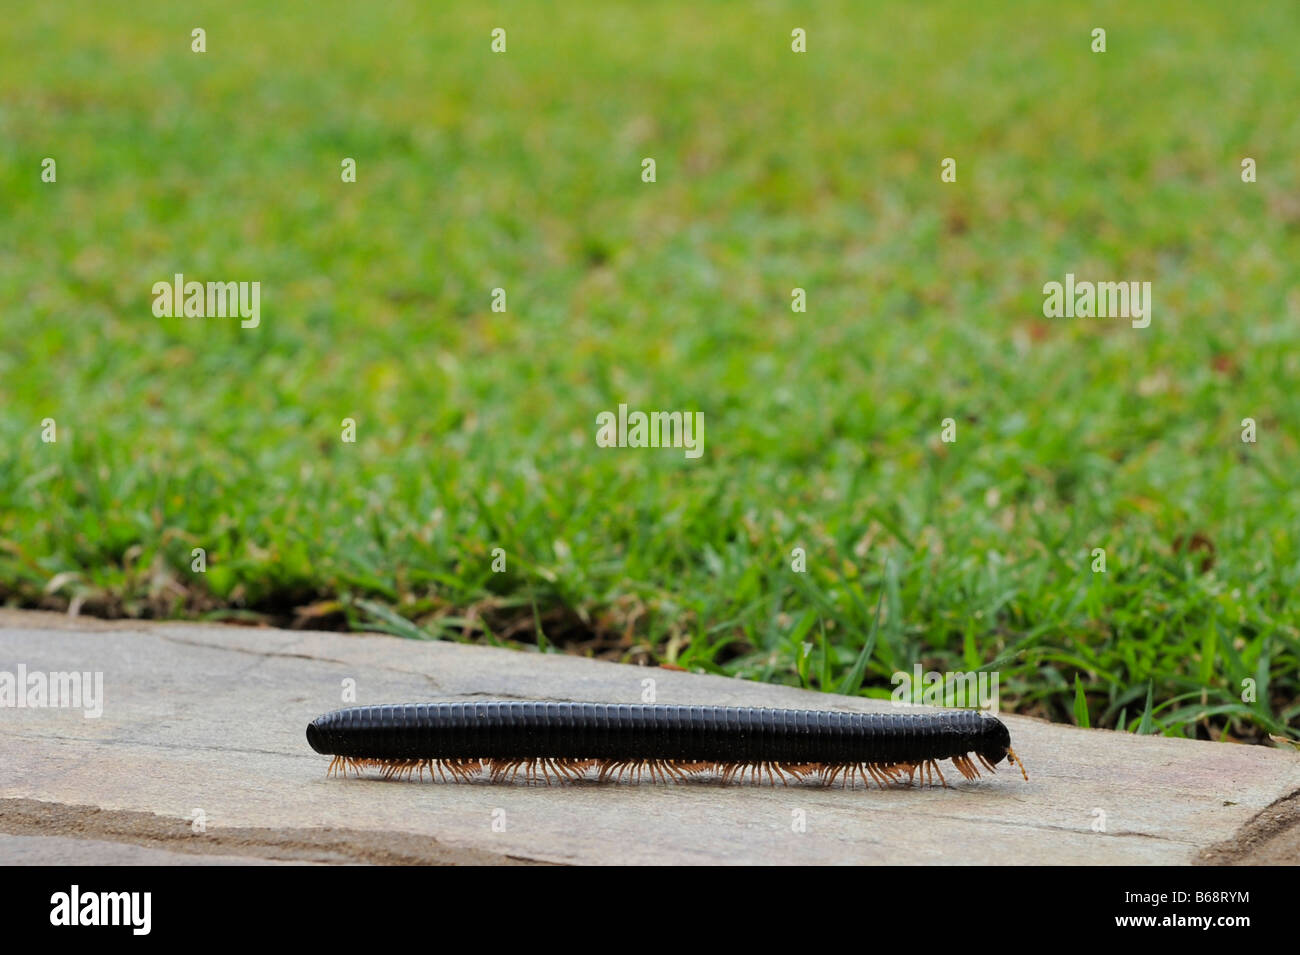 giant african millipede Stock Photo